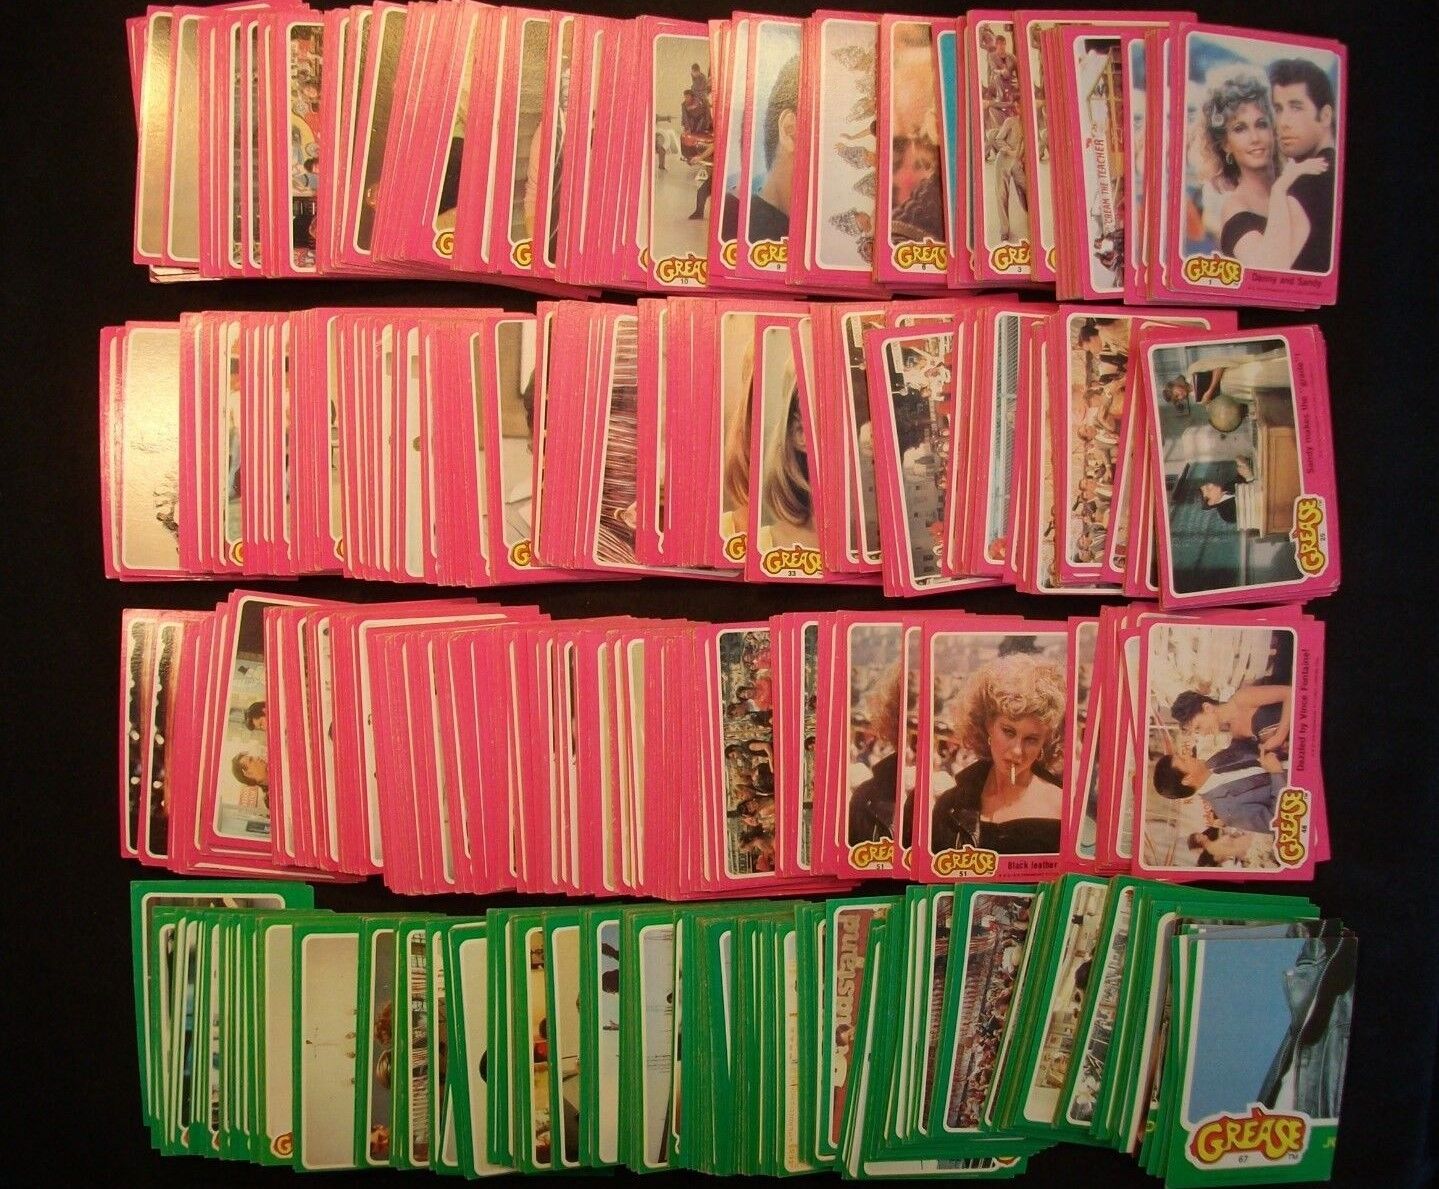 1978 Topps GREASE cards QUANTITY U PICK READ DESCRIPTION BEFORE BUYING 3 FOR 1